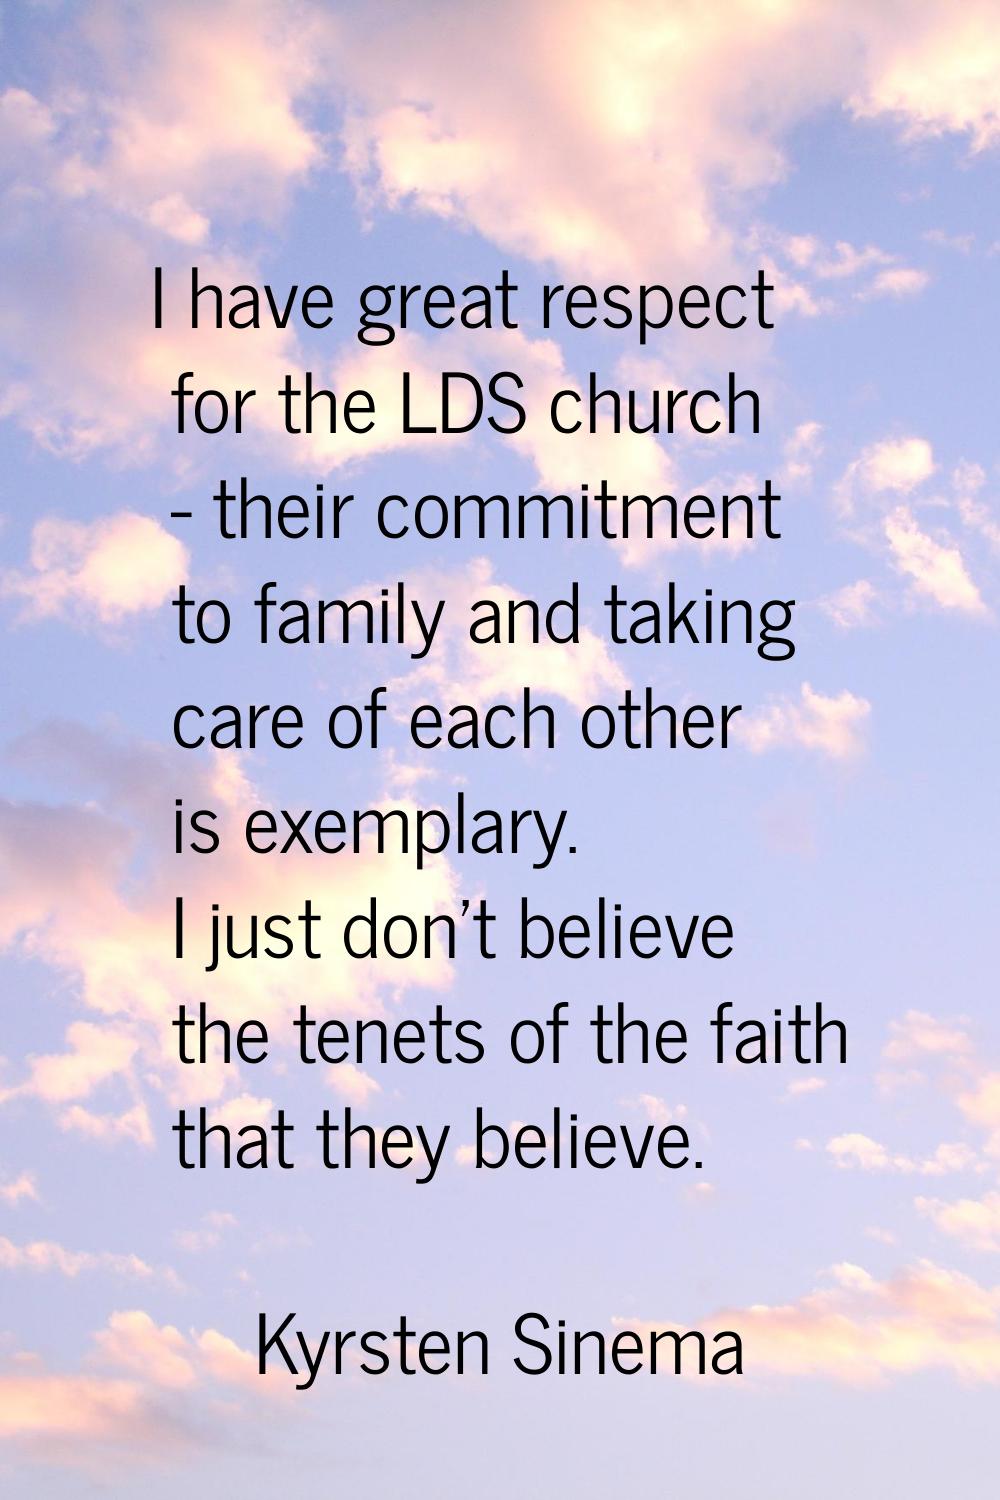 I have great respect for the LDS church - their commitment to family and taking care of each other 